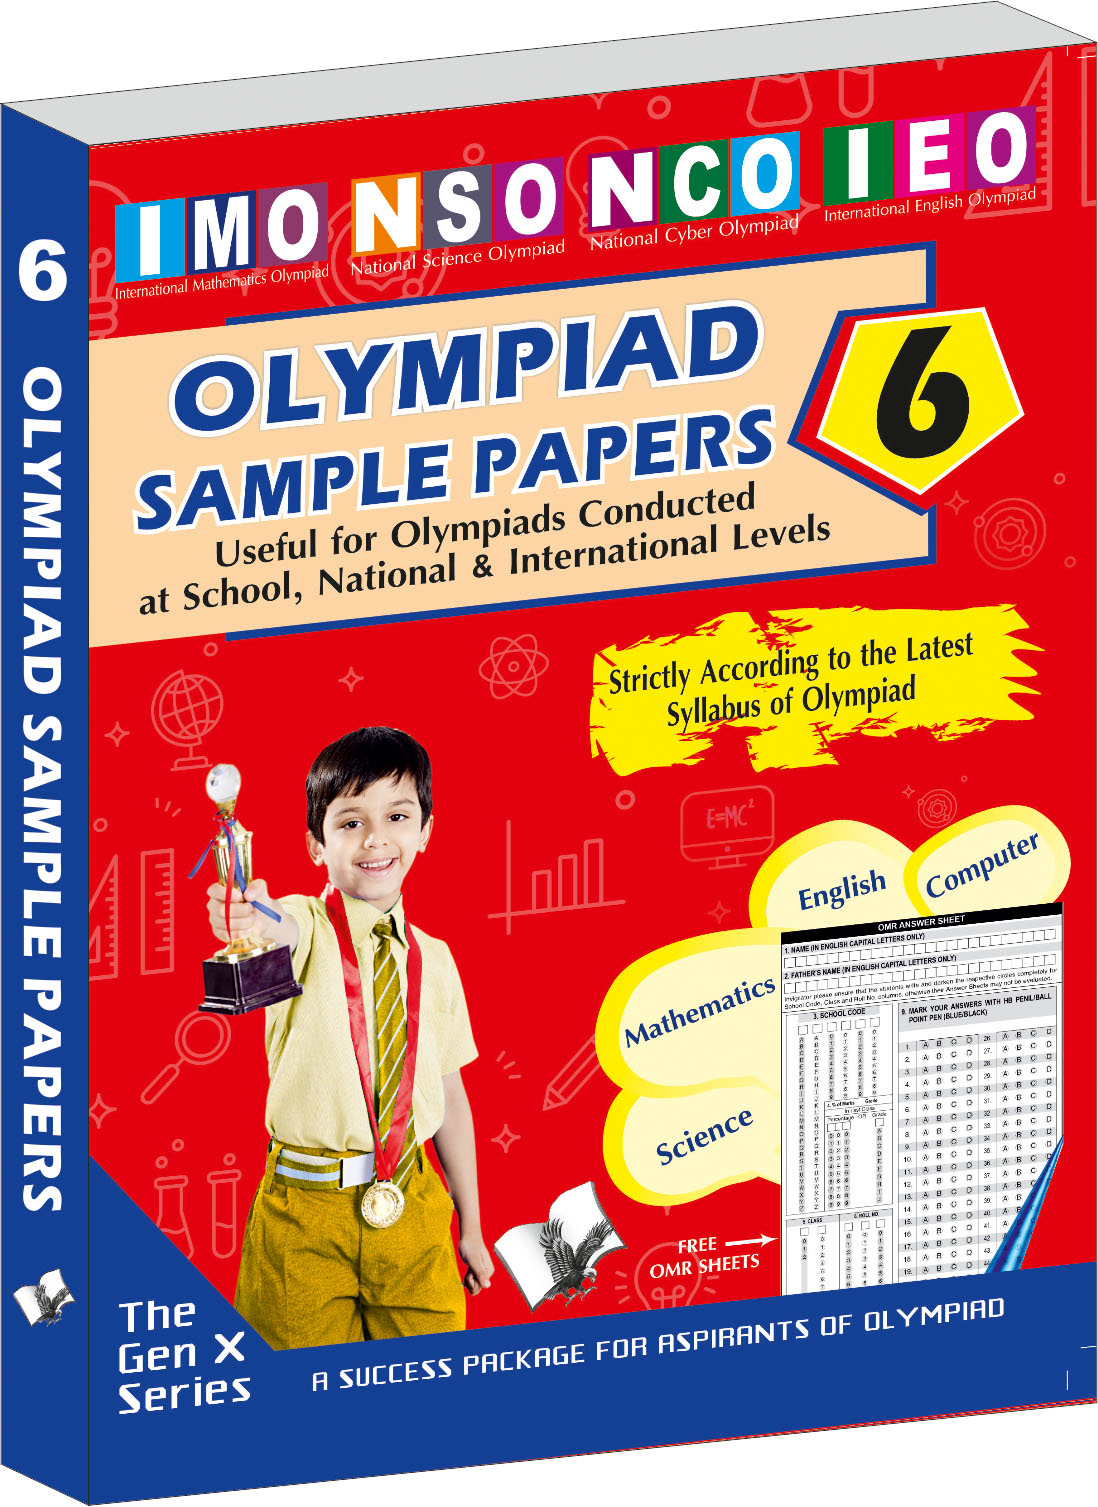 Olympiad Sample Paper 6-Useful for Olympiad conducted at School, National & International levels